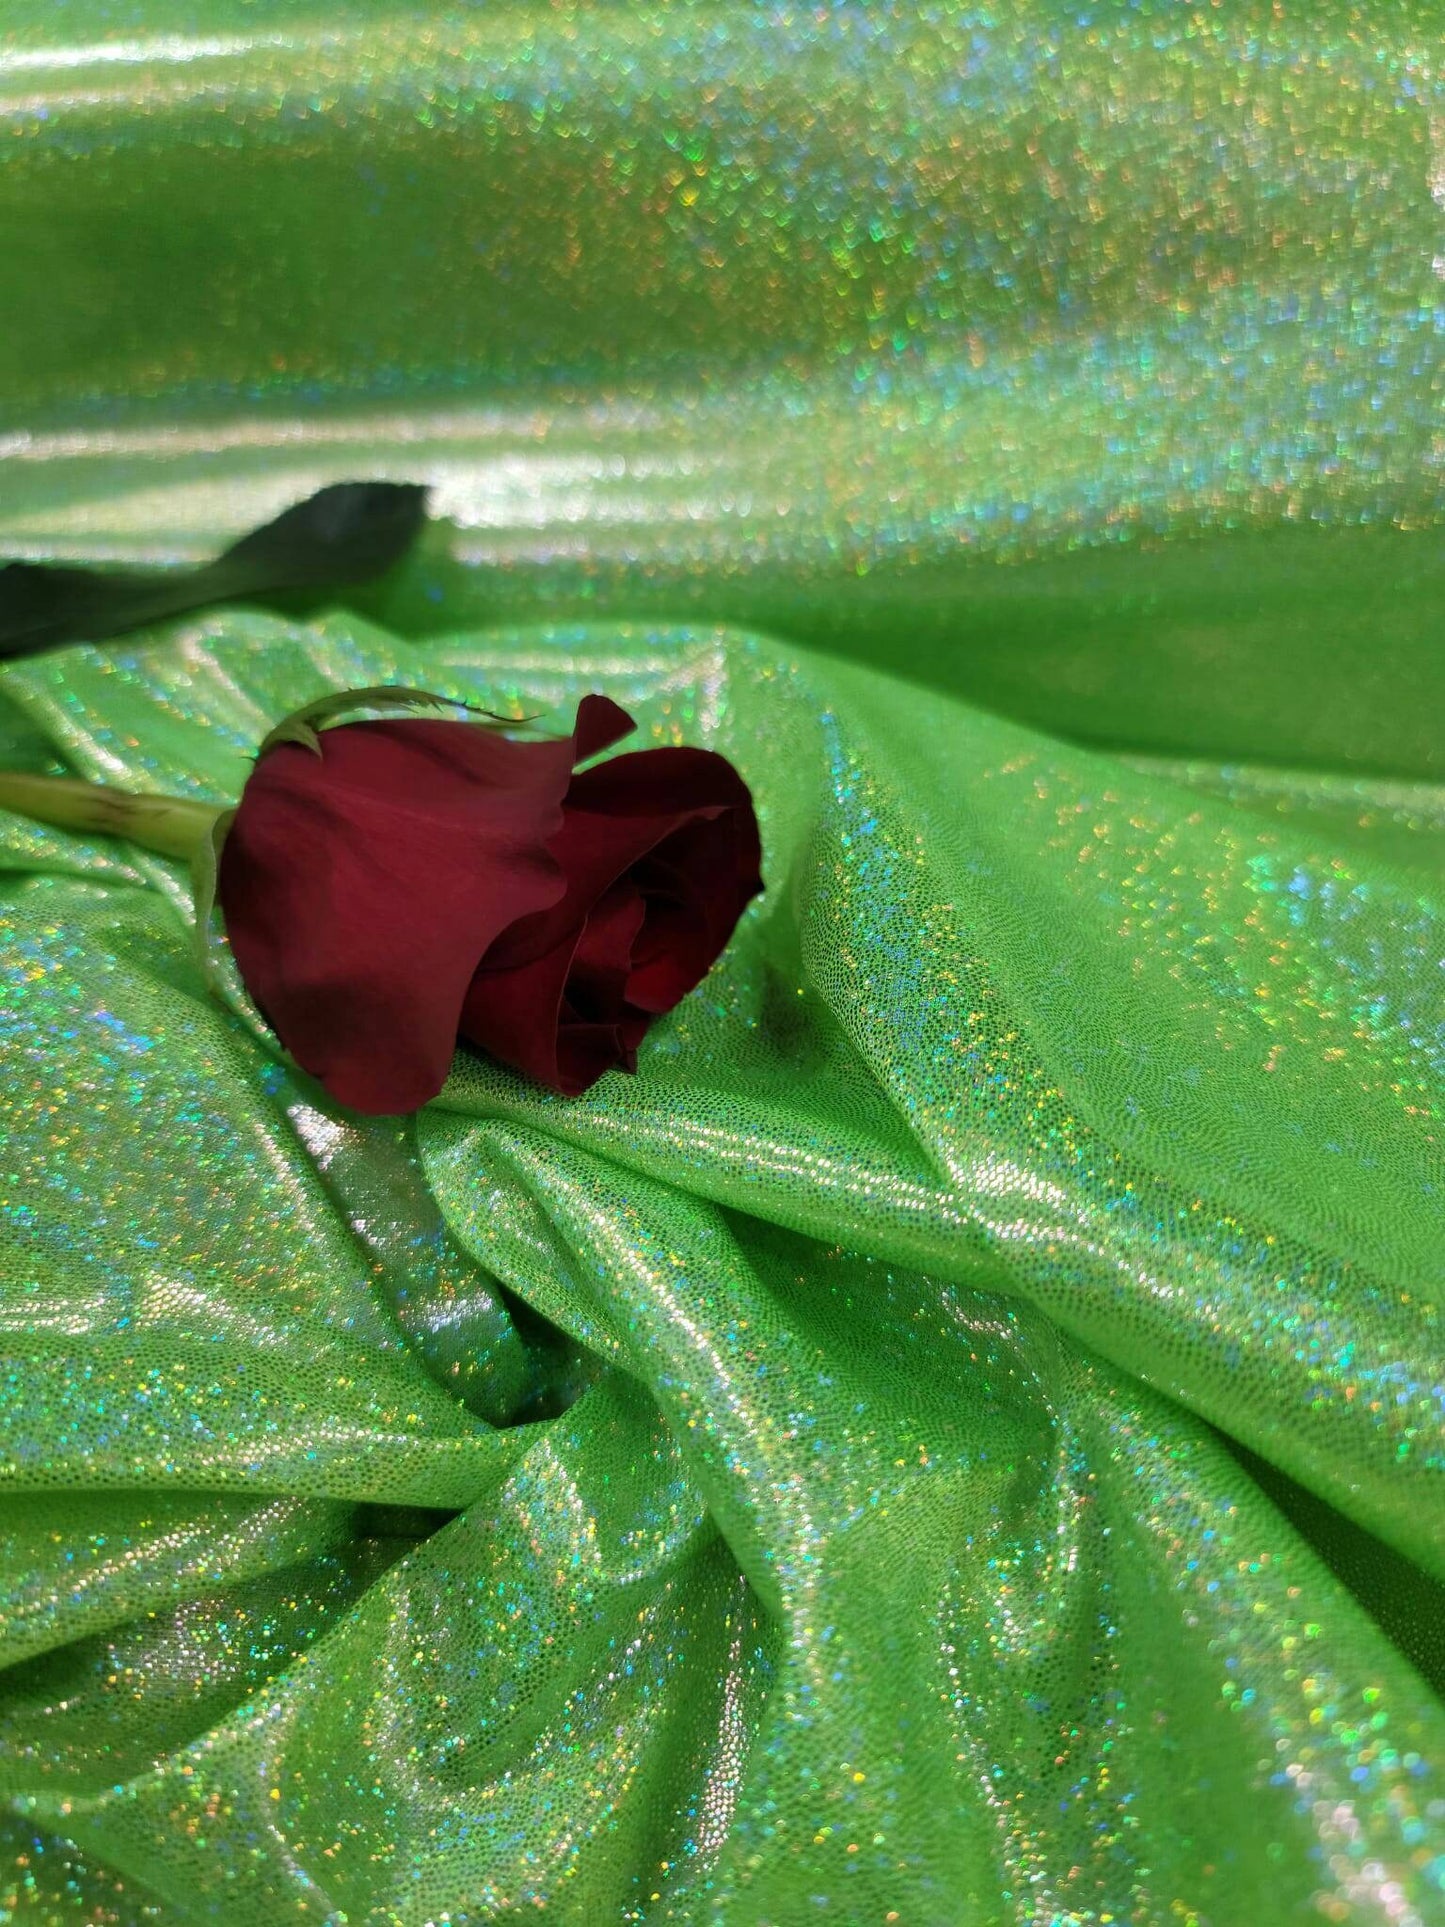 Neón Green Sparkly Shimmer Glossy Iridescent Ligth Weight Foil Fabric Sold By The Yard Hologram Glitz Glitter Lame Foil